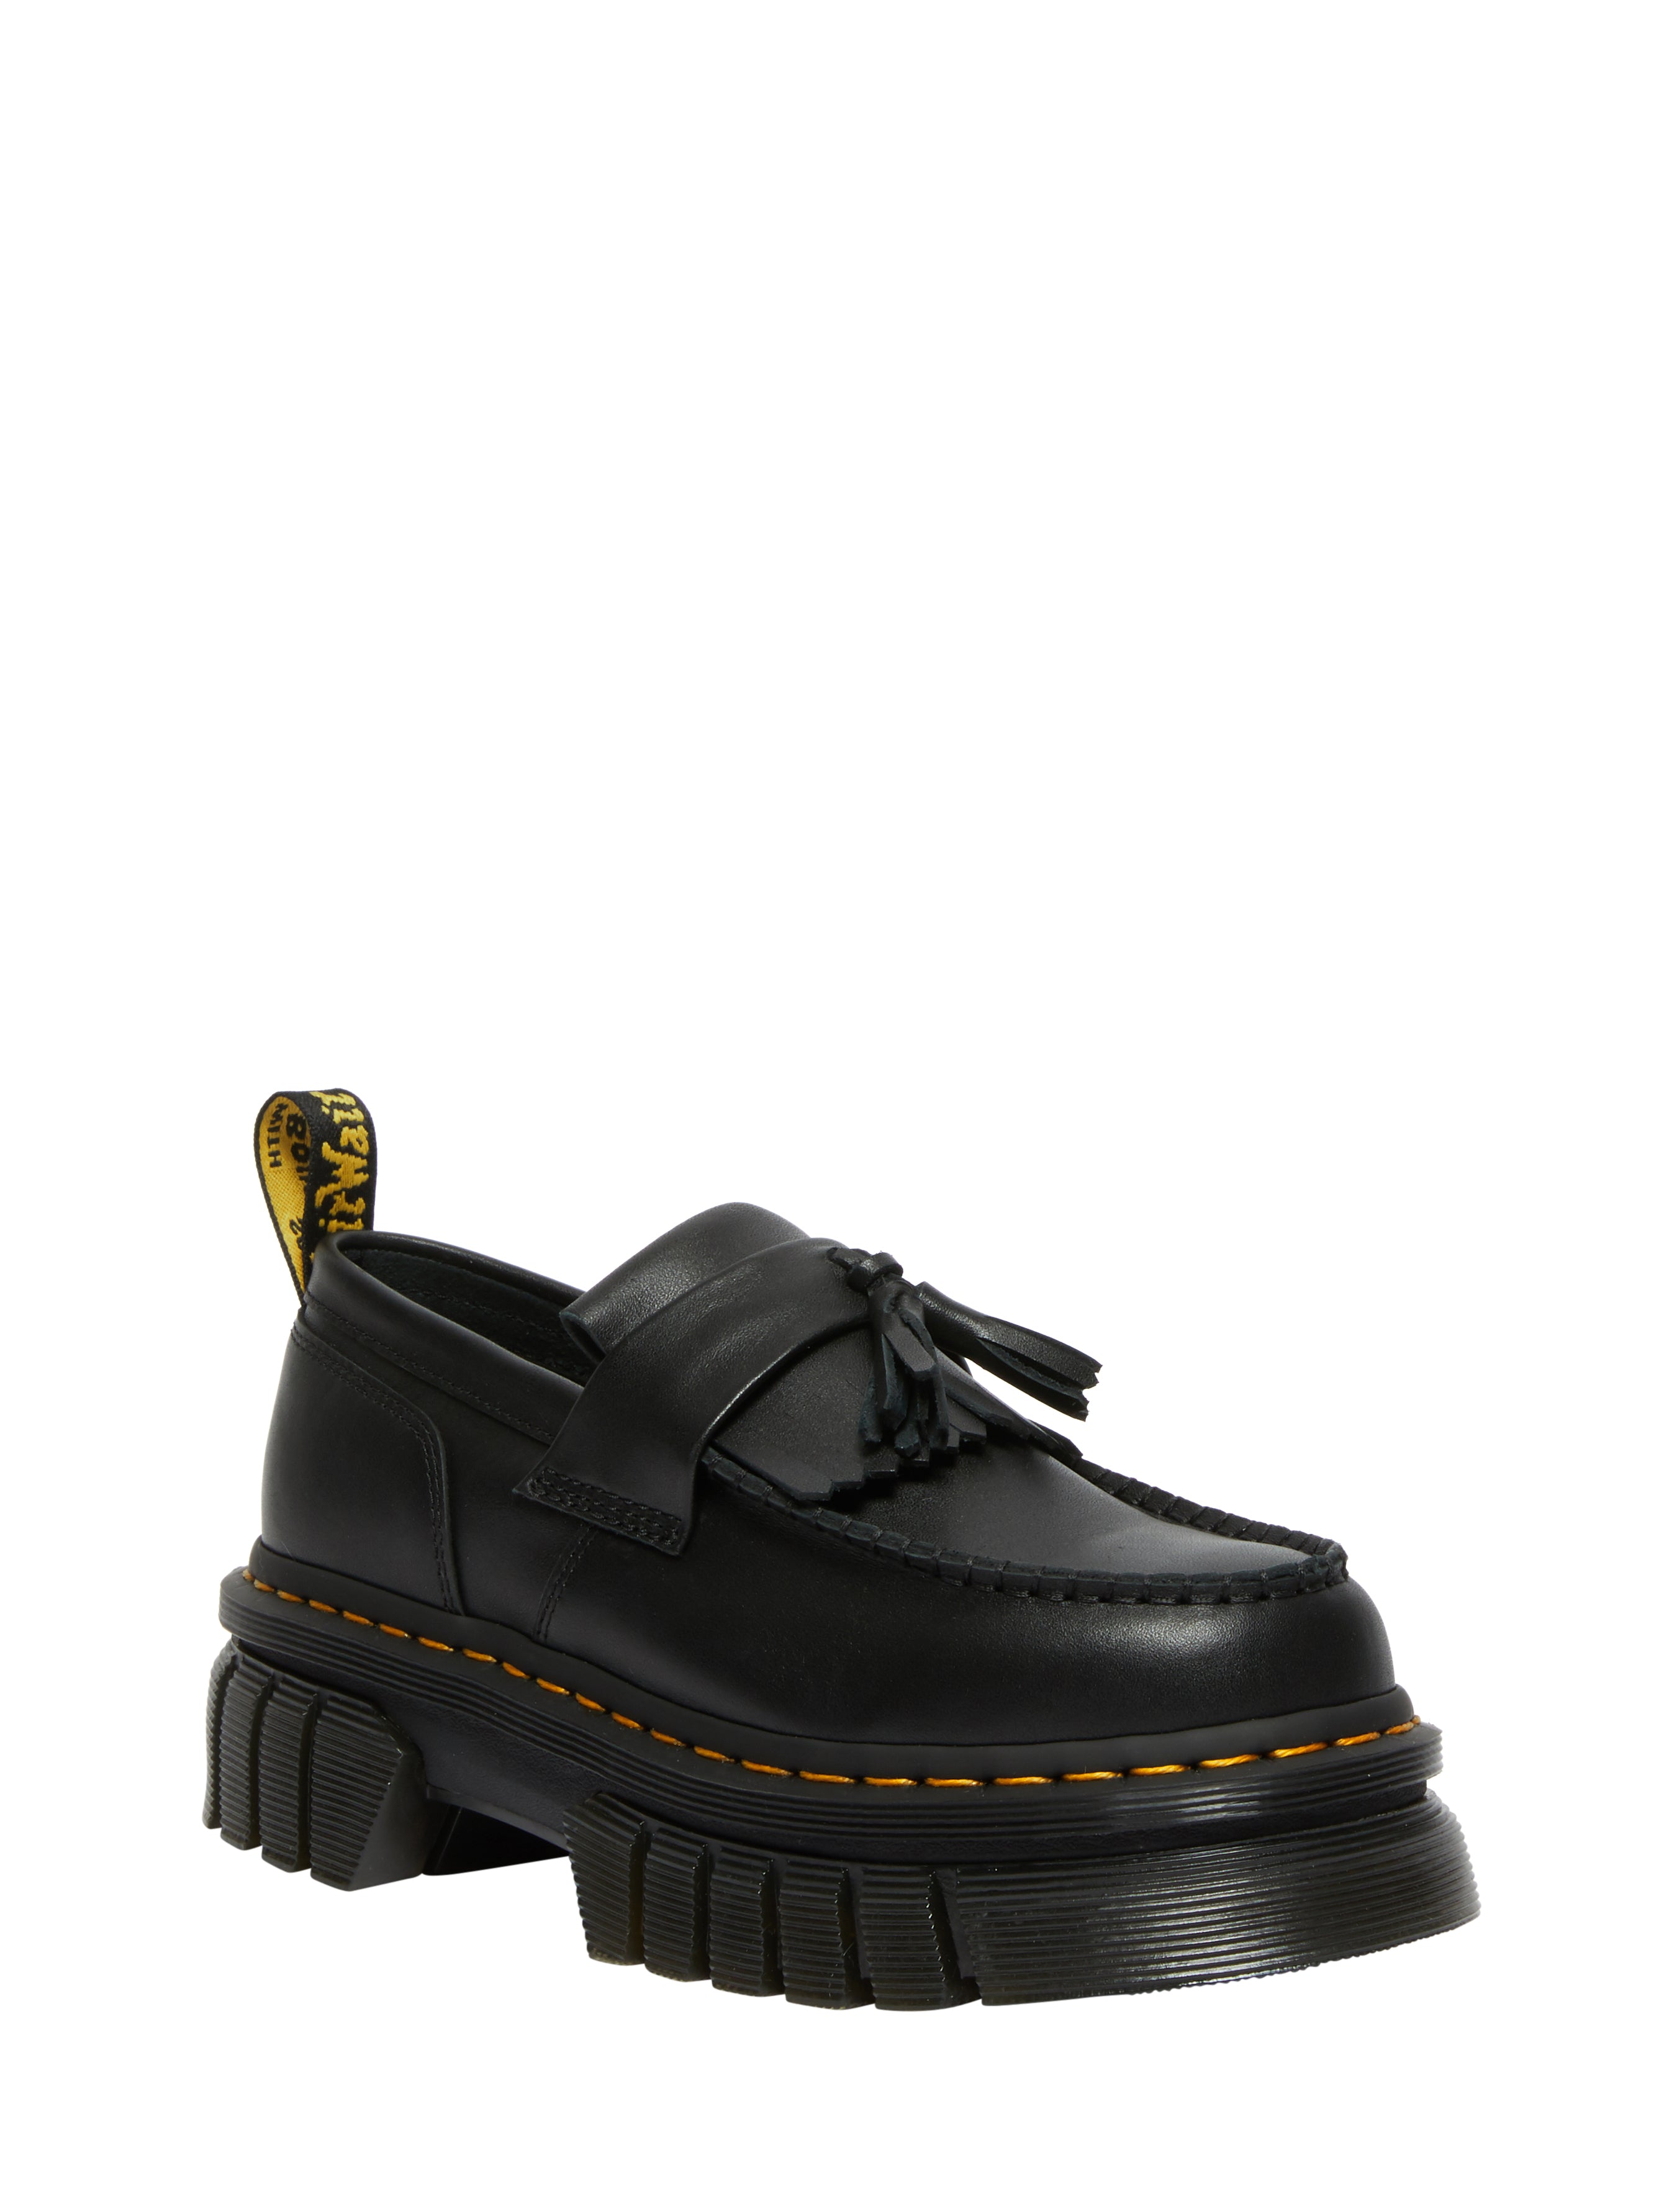 DR.MARTENS ANFIBIO Unisex AUDRICK-LOAFER Black Nappa Lux